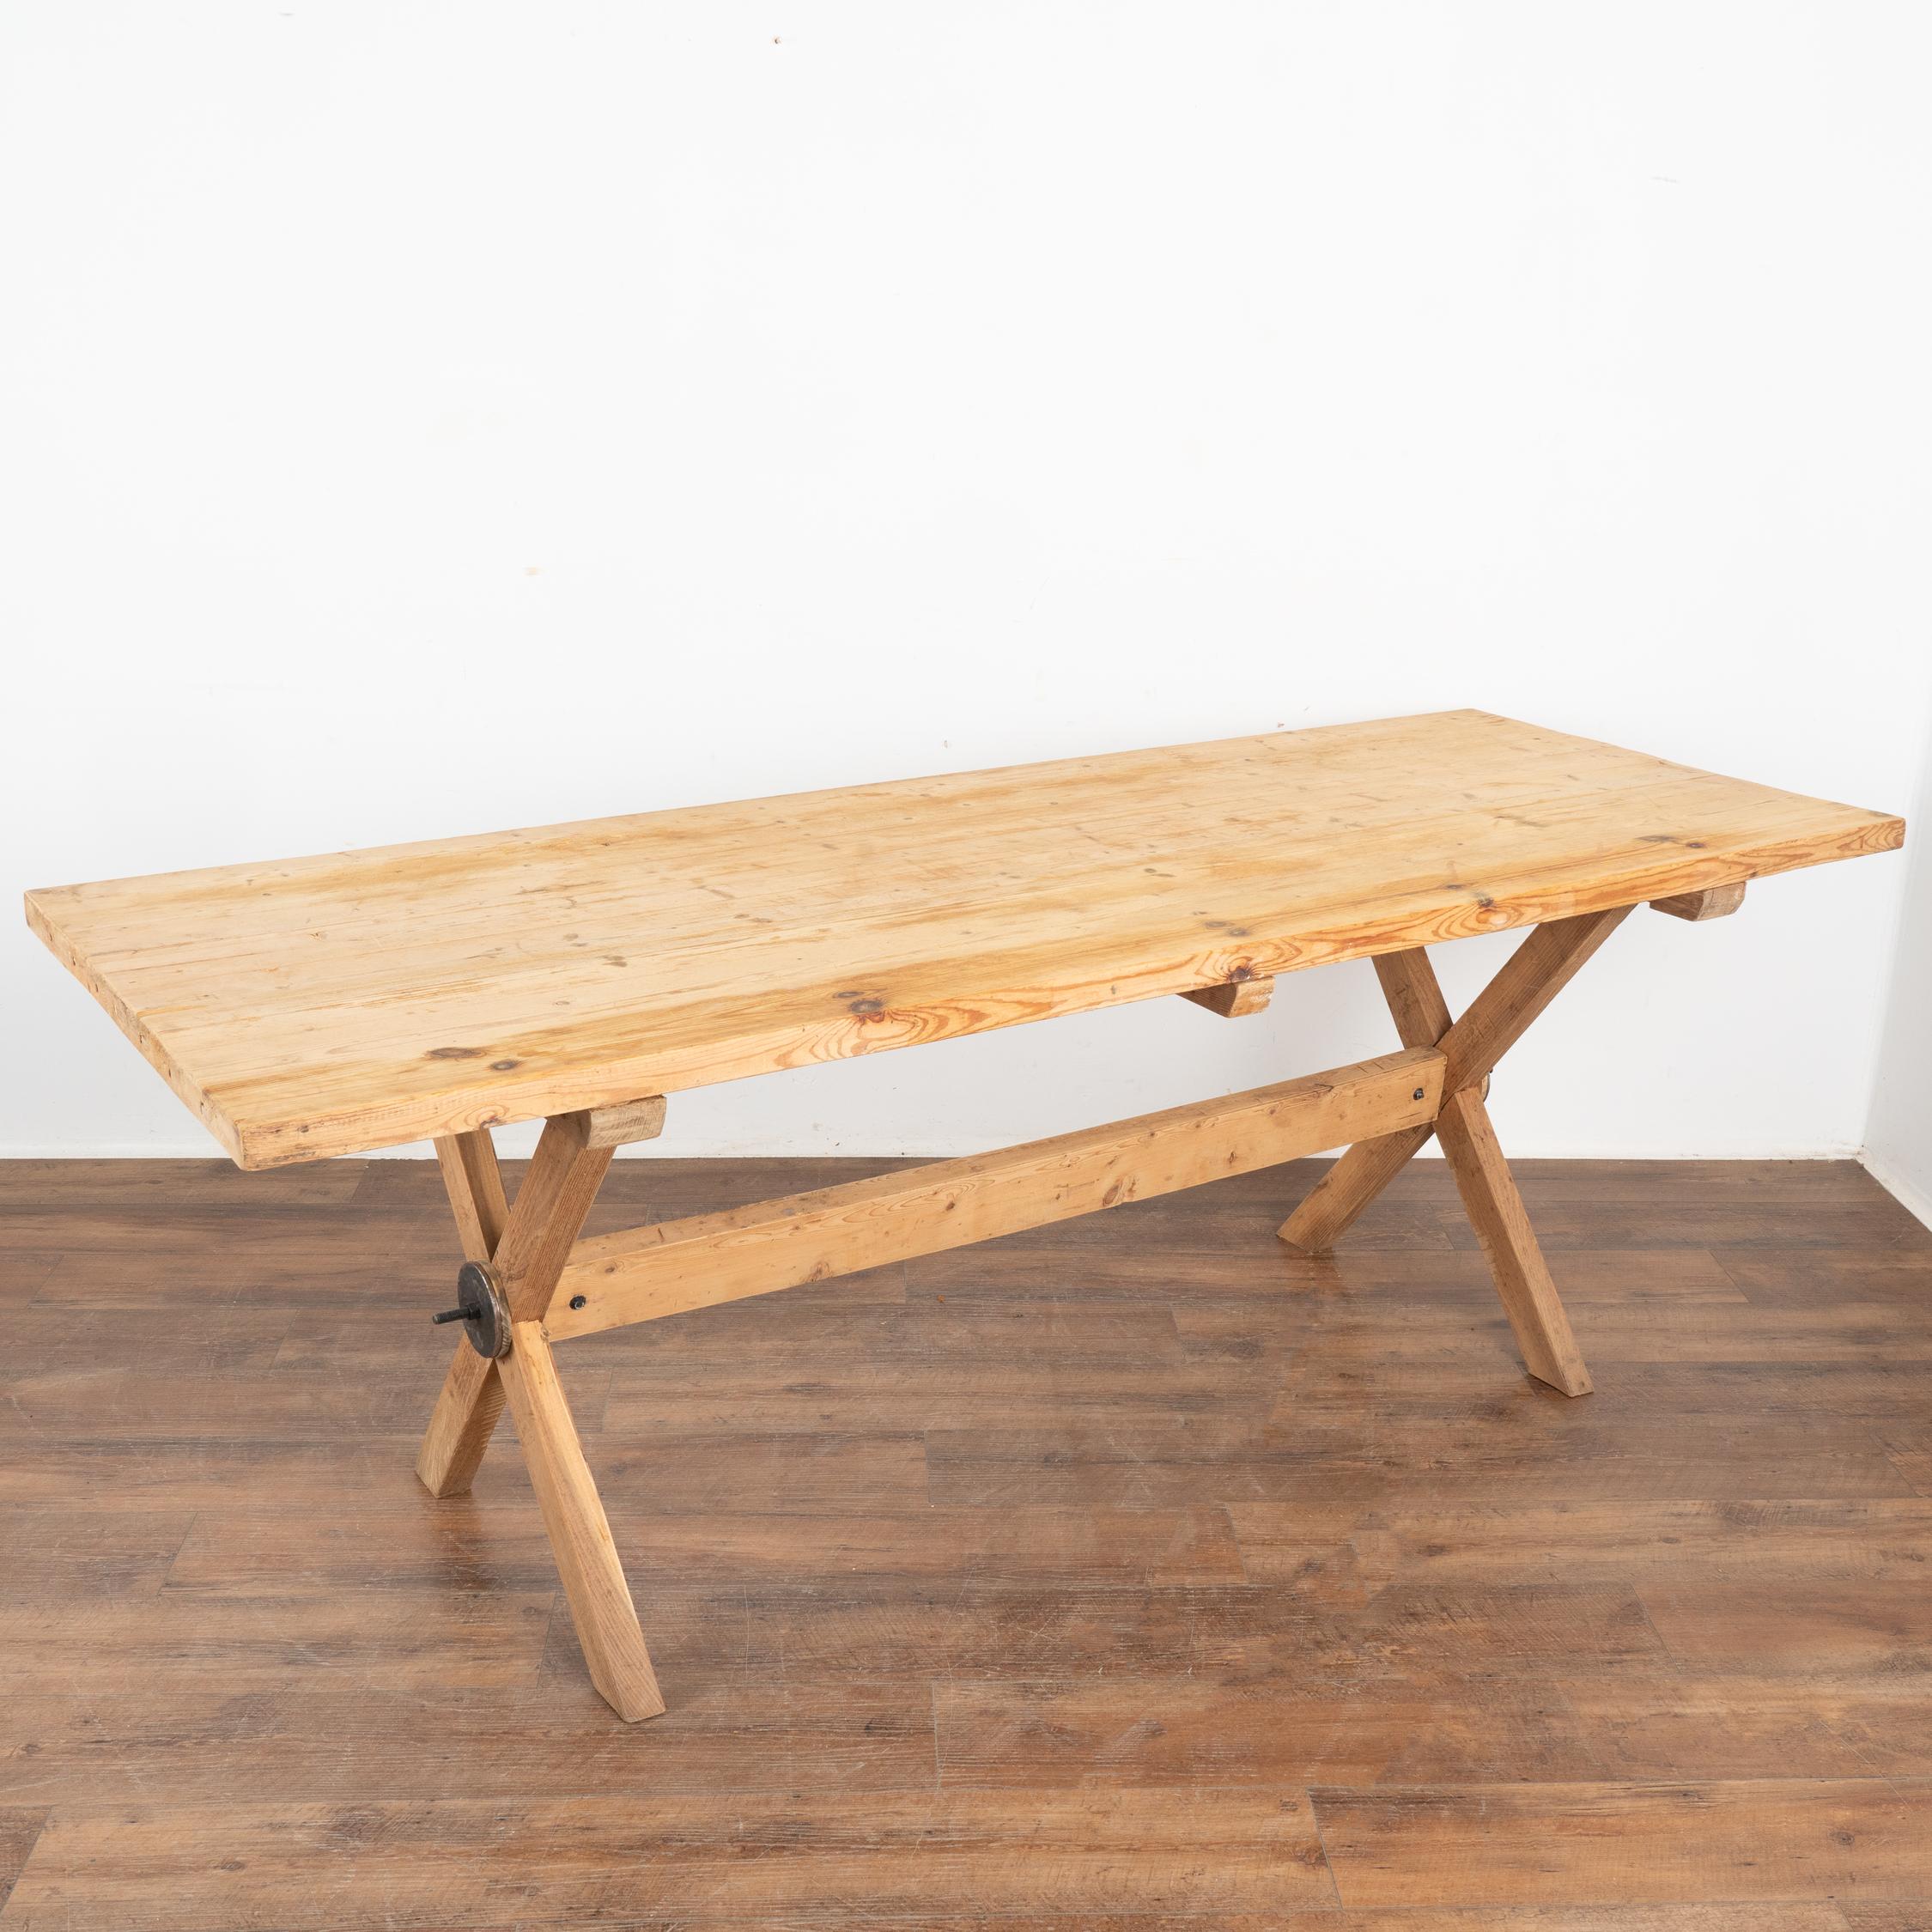 This 7' farmhouse dining or kitchen table has European country charm thanks to the unique X-stretcher base.
The natural pine has been distressed through generations of use, adding depth to the character of the table. The many scratches, dings,